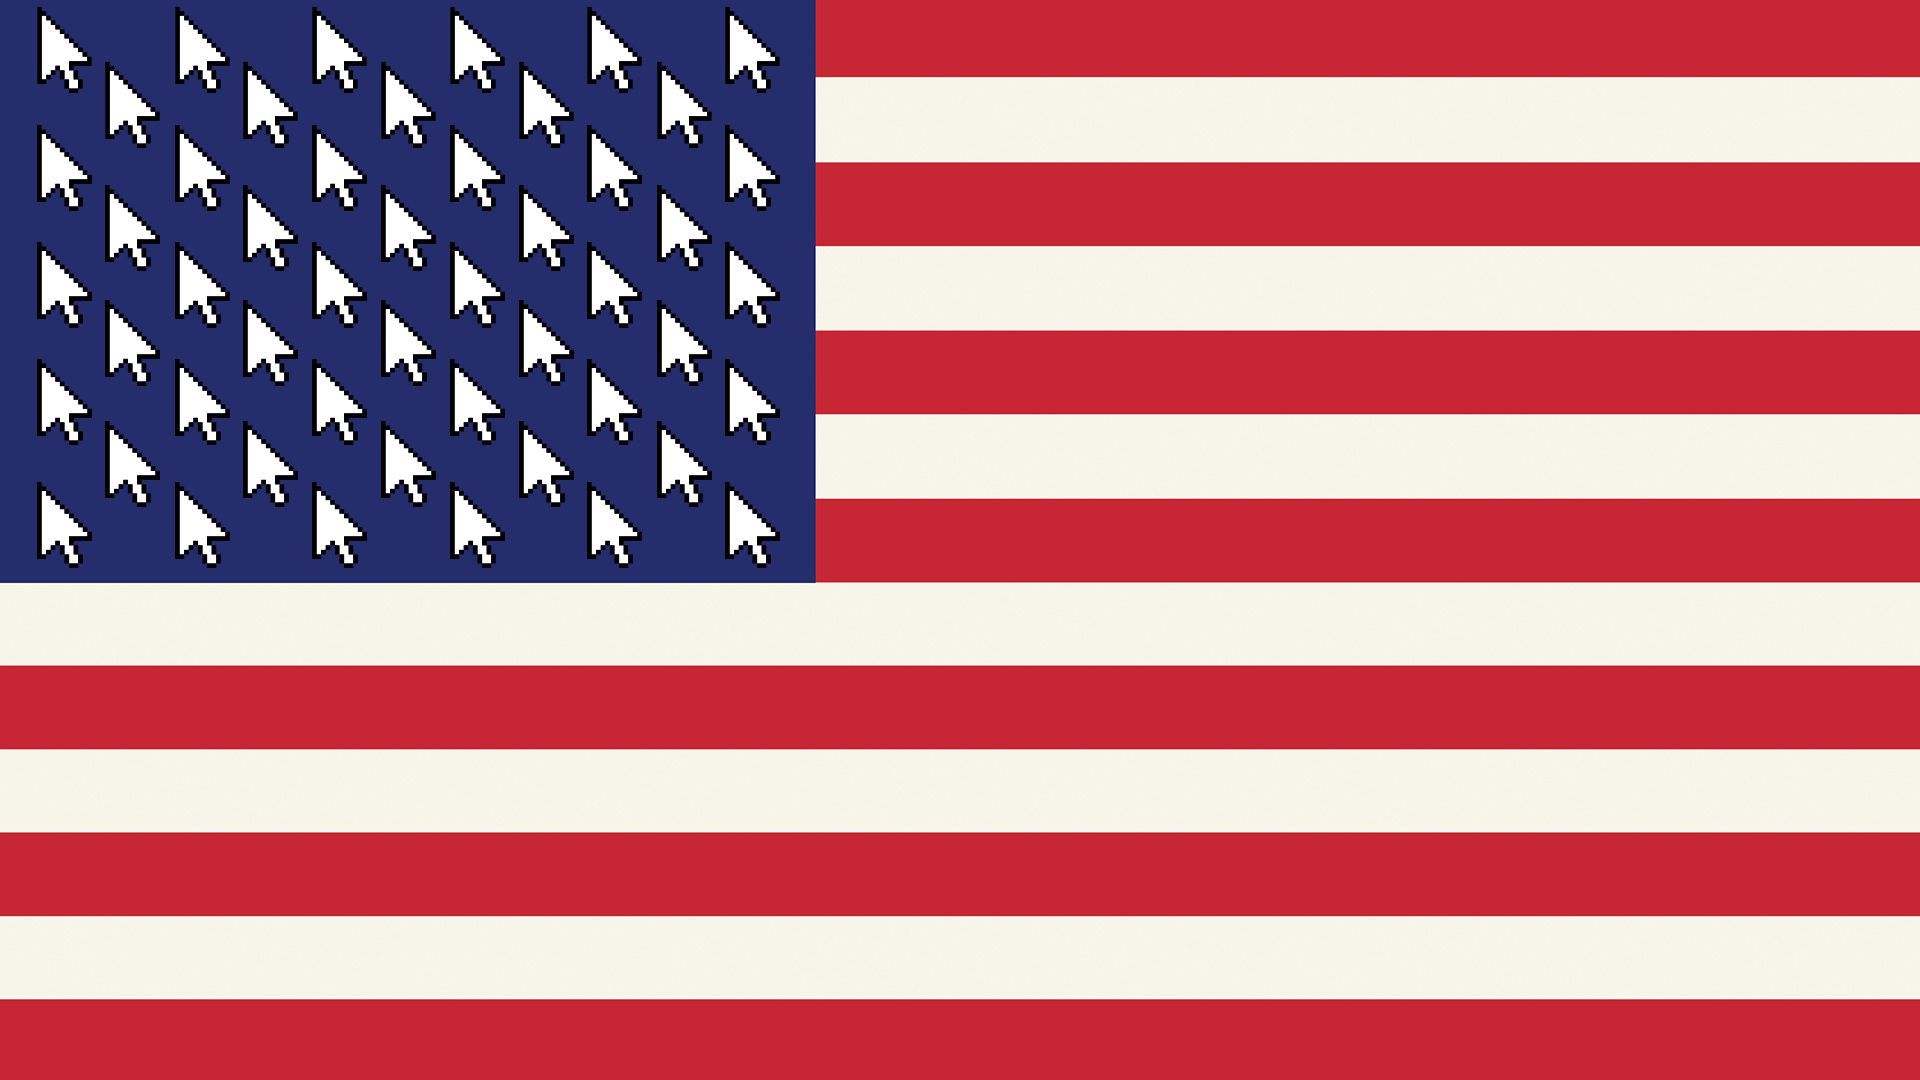 Illustration of the American flag with the stars replaced with cursors.  